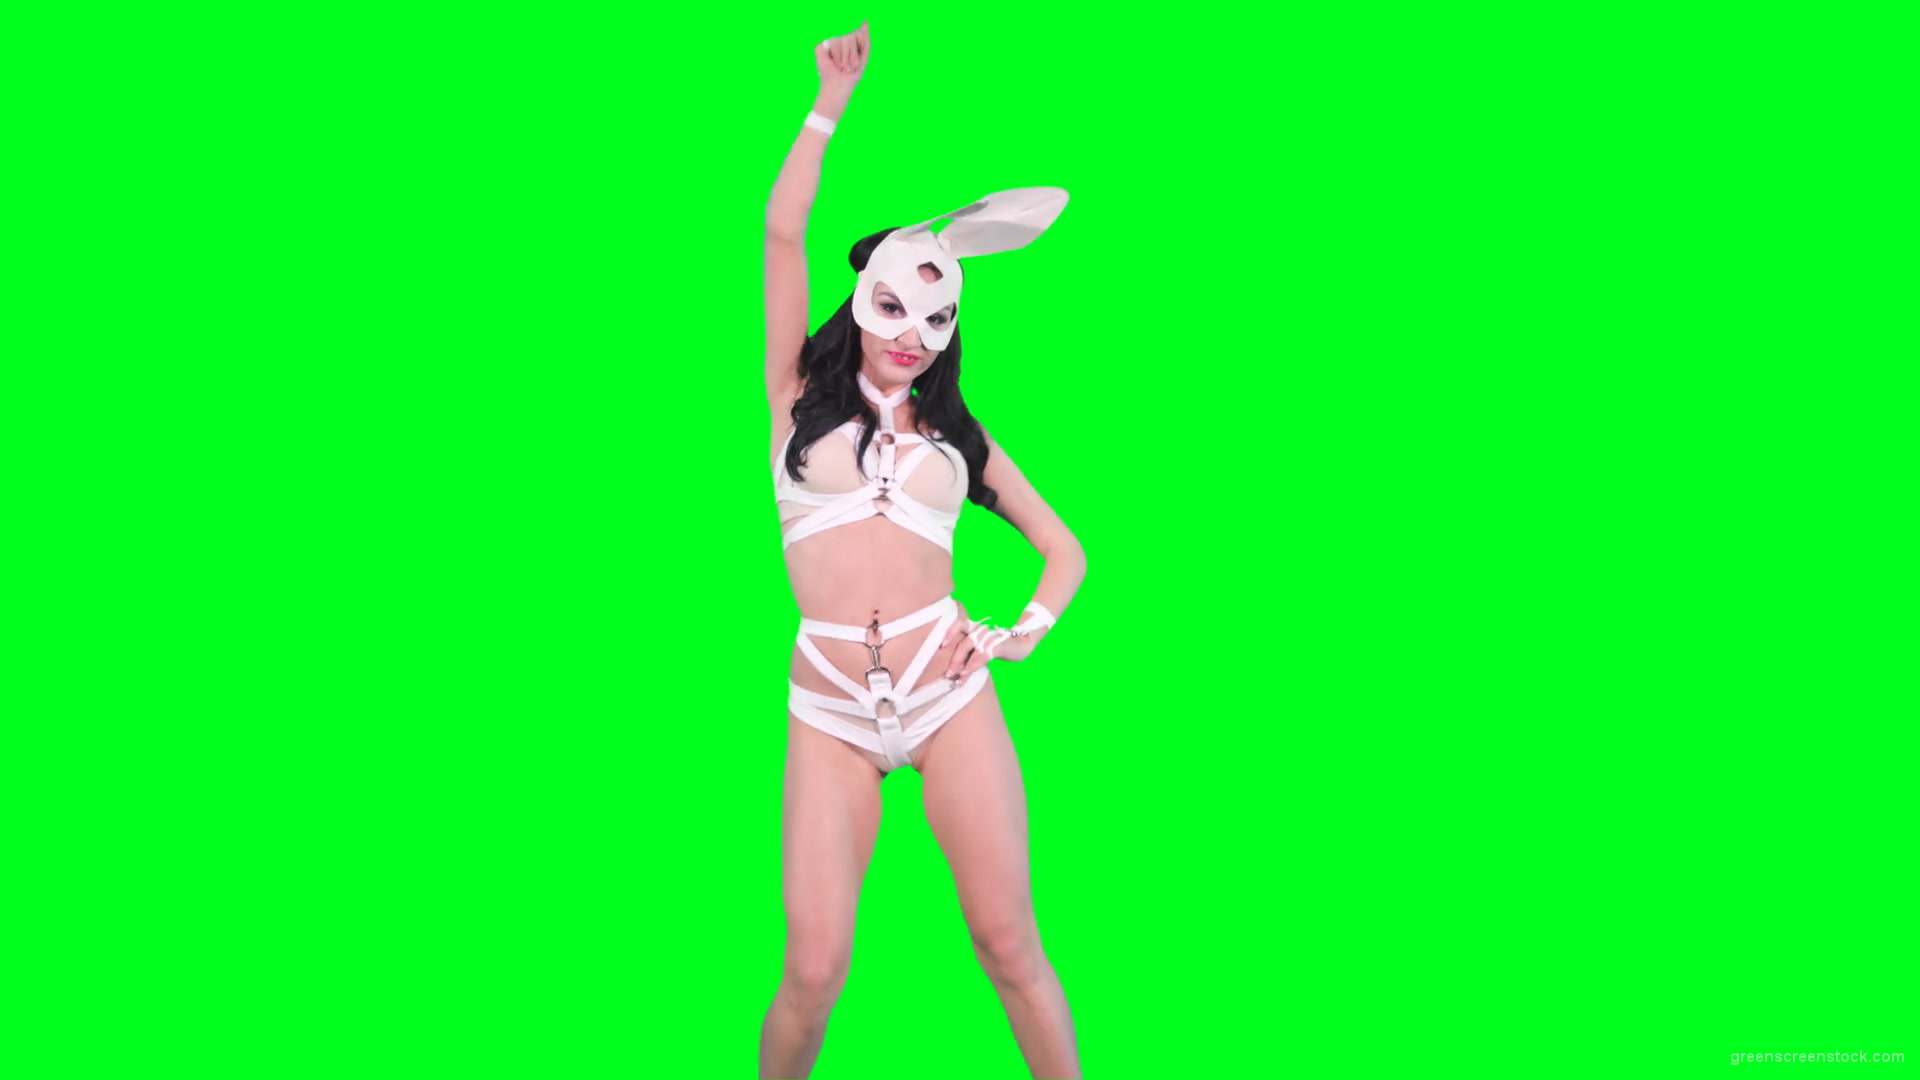 Girl-in-rabbit-bunny-mask-posing-and-show-gestures-on-green-screen-4K-Video-Footage-1920_006 Green Screen Stock